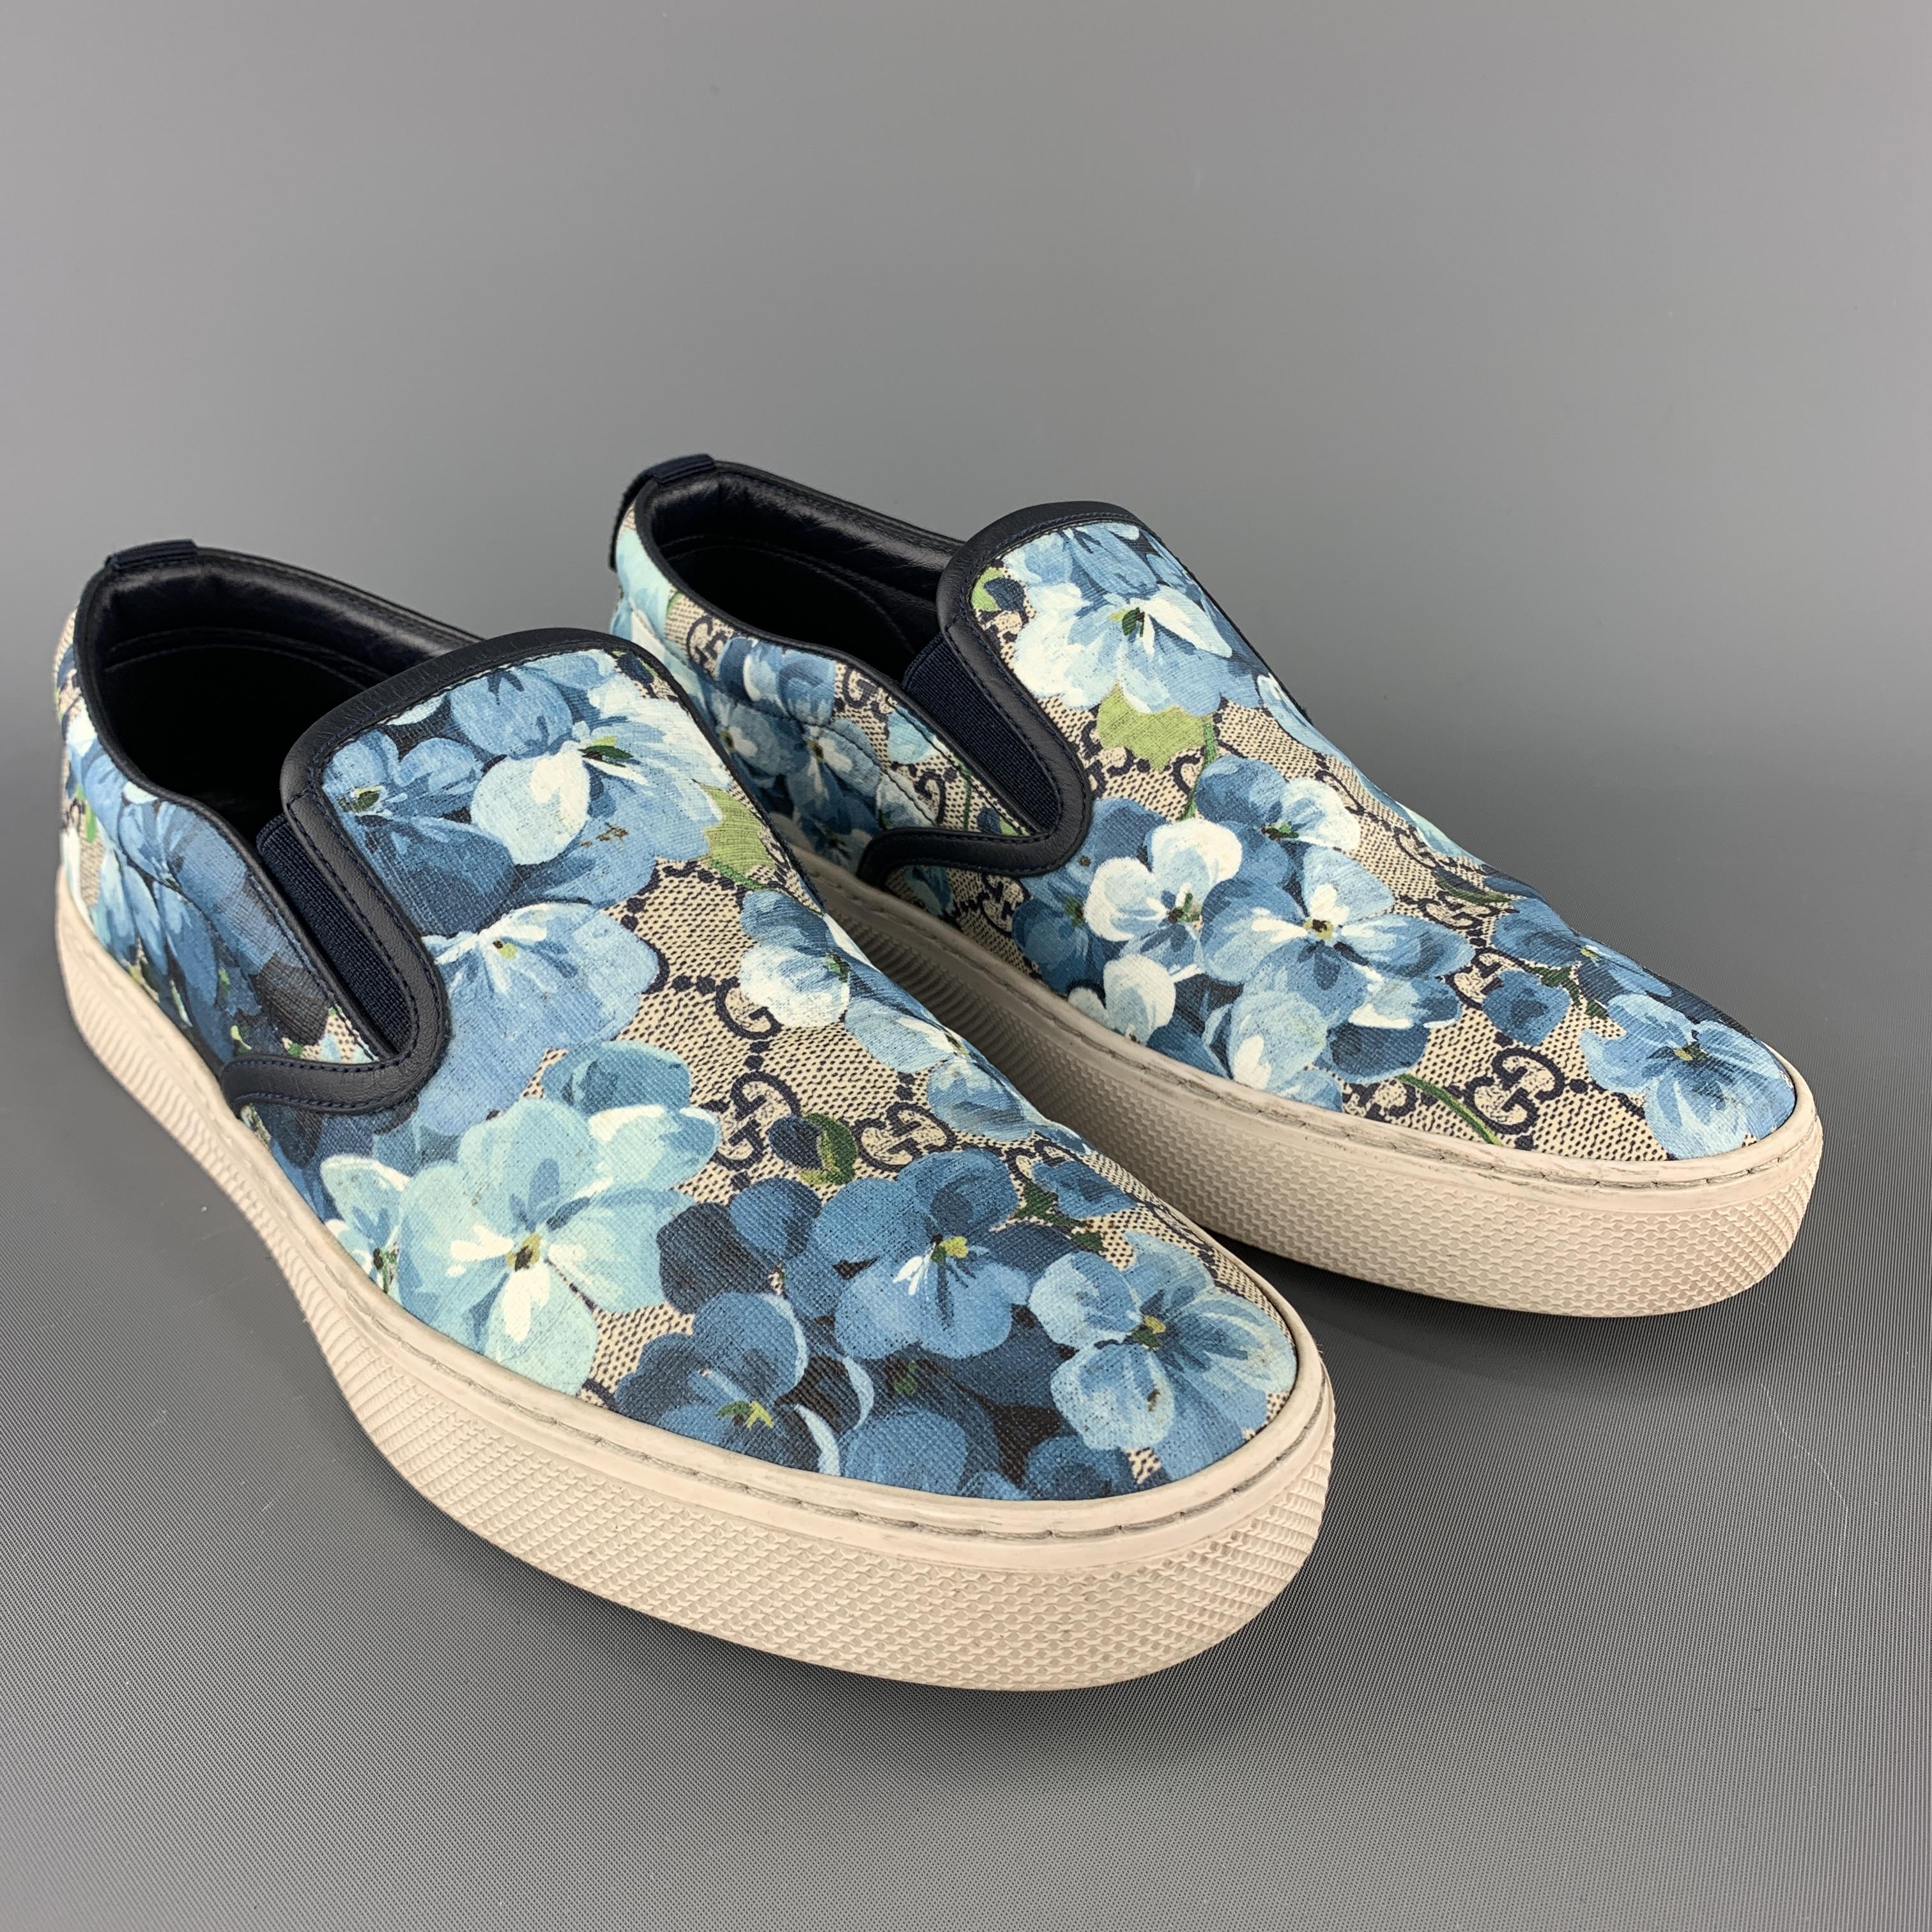 GUCCI slip on sneakers come in beige monogram coated canvas with blue blooms floral print throughout, navy leather trim, and white rubber sole. Minor wear. As-is. Made in Italy.
 

Good Pre-Owned Condition.
Marked: UK 8.5

Outsole: 11.5 x 4.75 in.